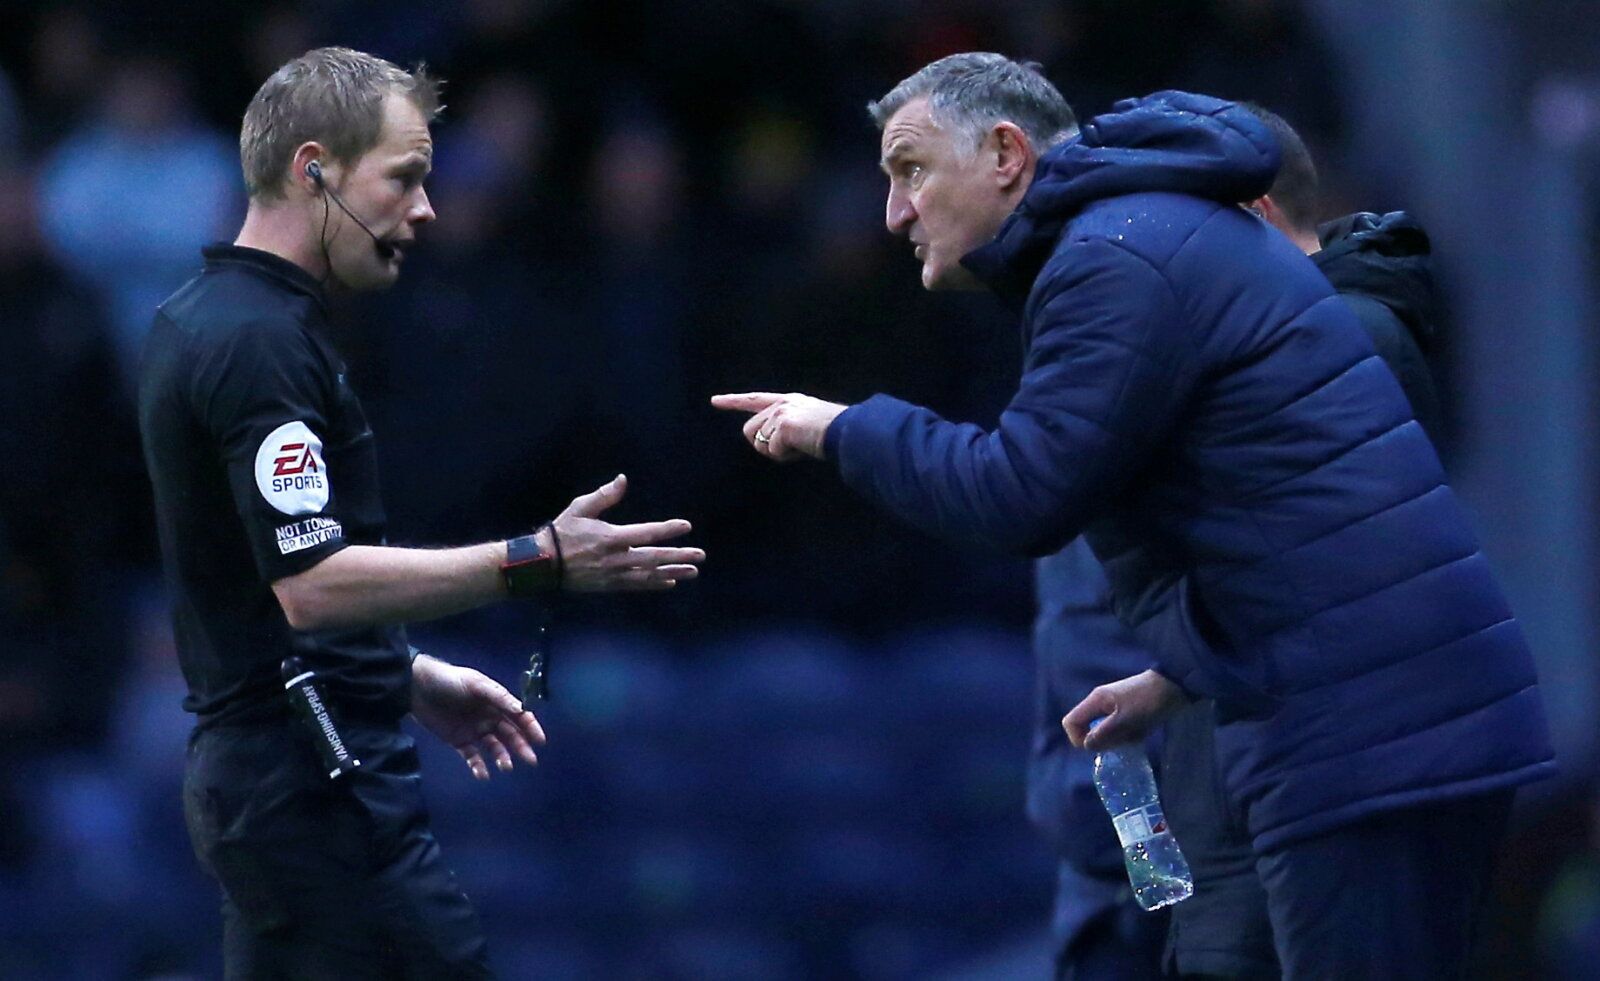 Soccer Football - Blackburn Rovers v Preston North End - Ewood Park, Blackburn, Britain - December 4, 2021  Blackburn Rovers manager Tony Mowbray reacts after being shown a yellow card by the referee   Action Images/Craig Brough  EDITORIAL USE ONLY. No use with unauthorized audio, video, data, fixture lists, club/league logos or 